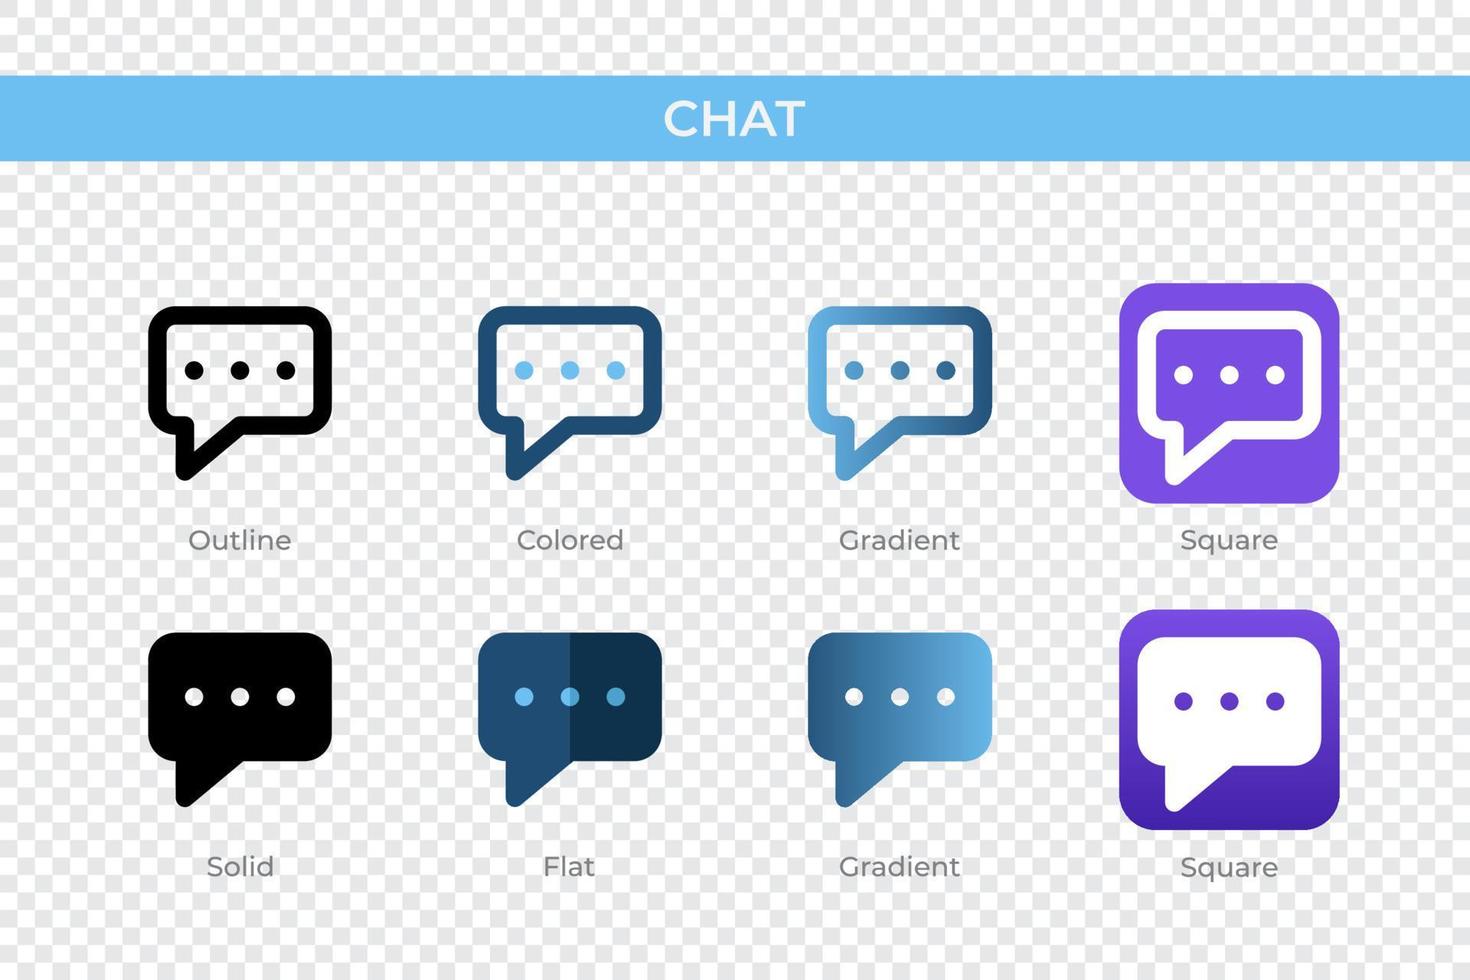 chat icon in different style. chat vector icons designed in outline, solid, colored, gradient, and flat style. Symbol, logo illustration. Vector illustration